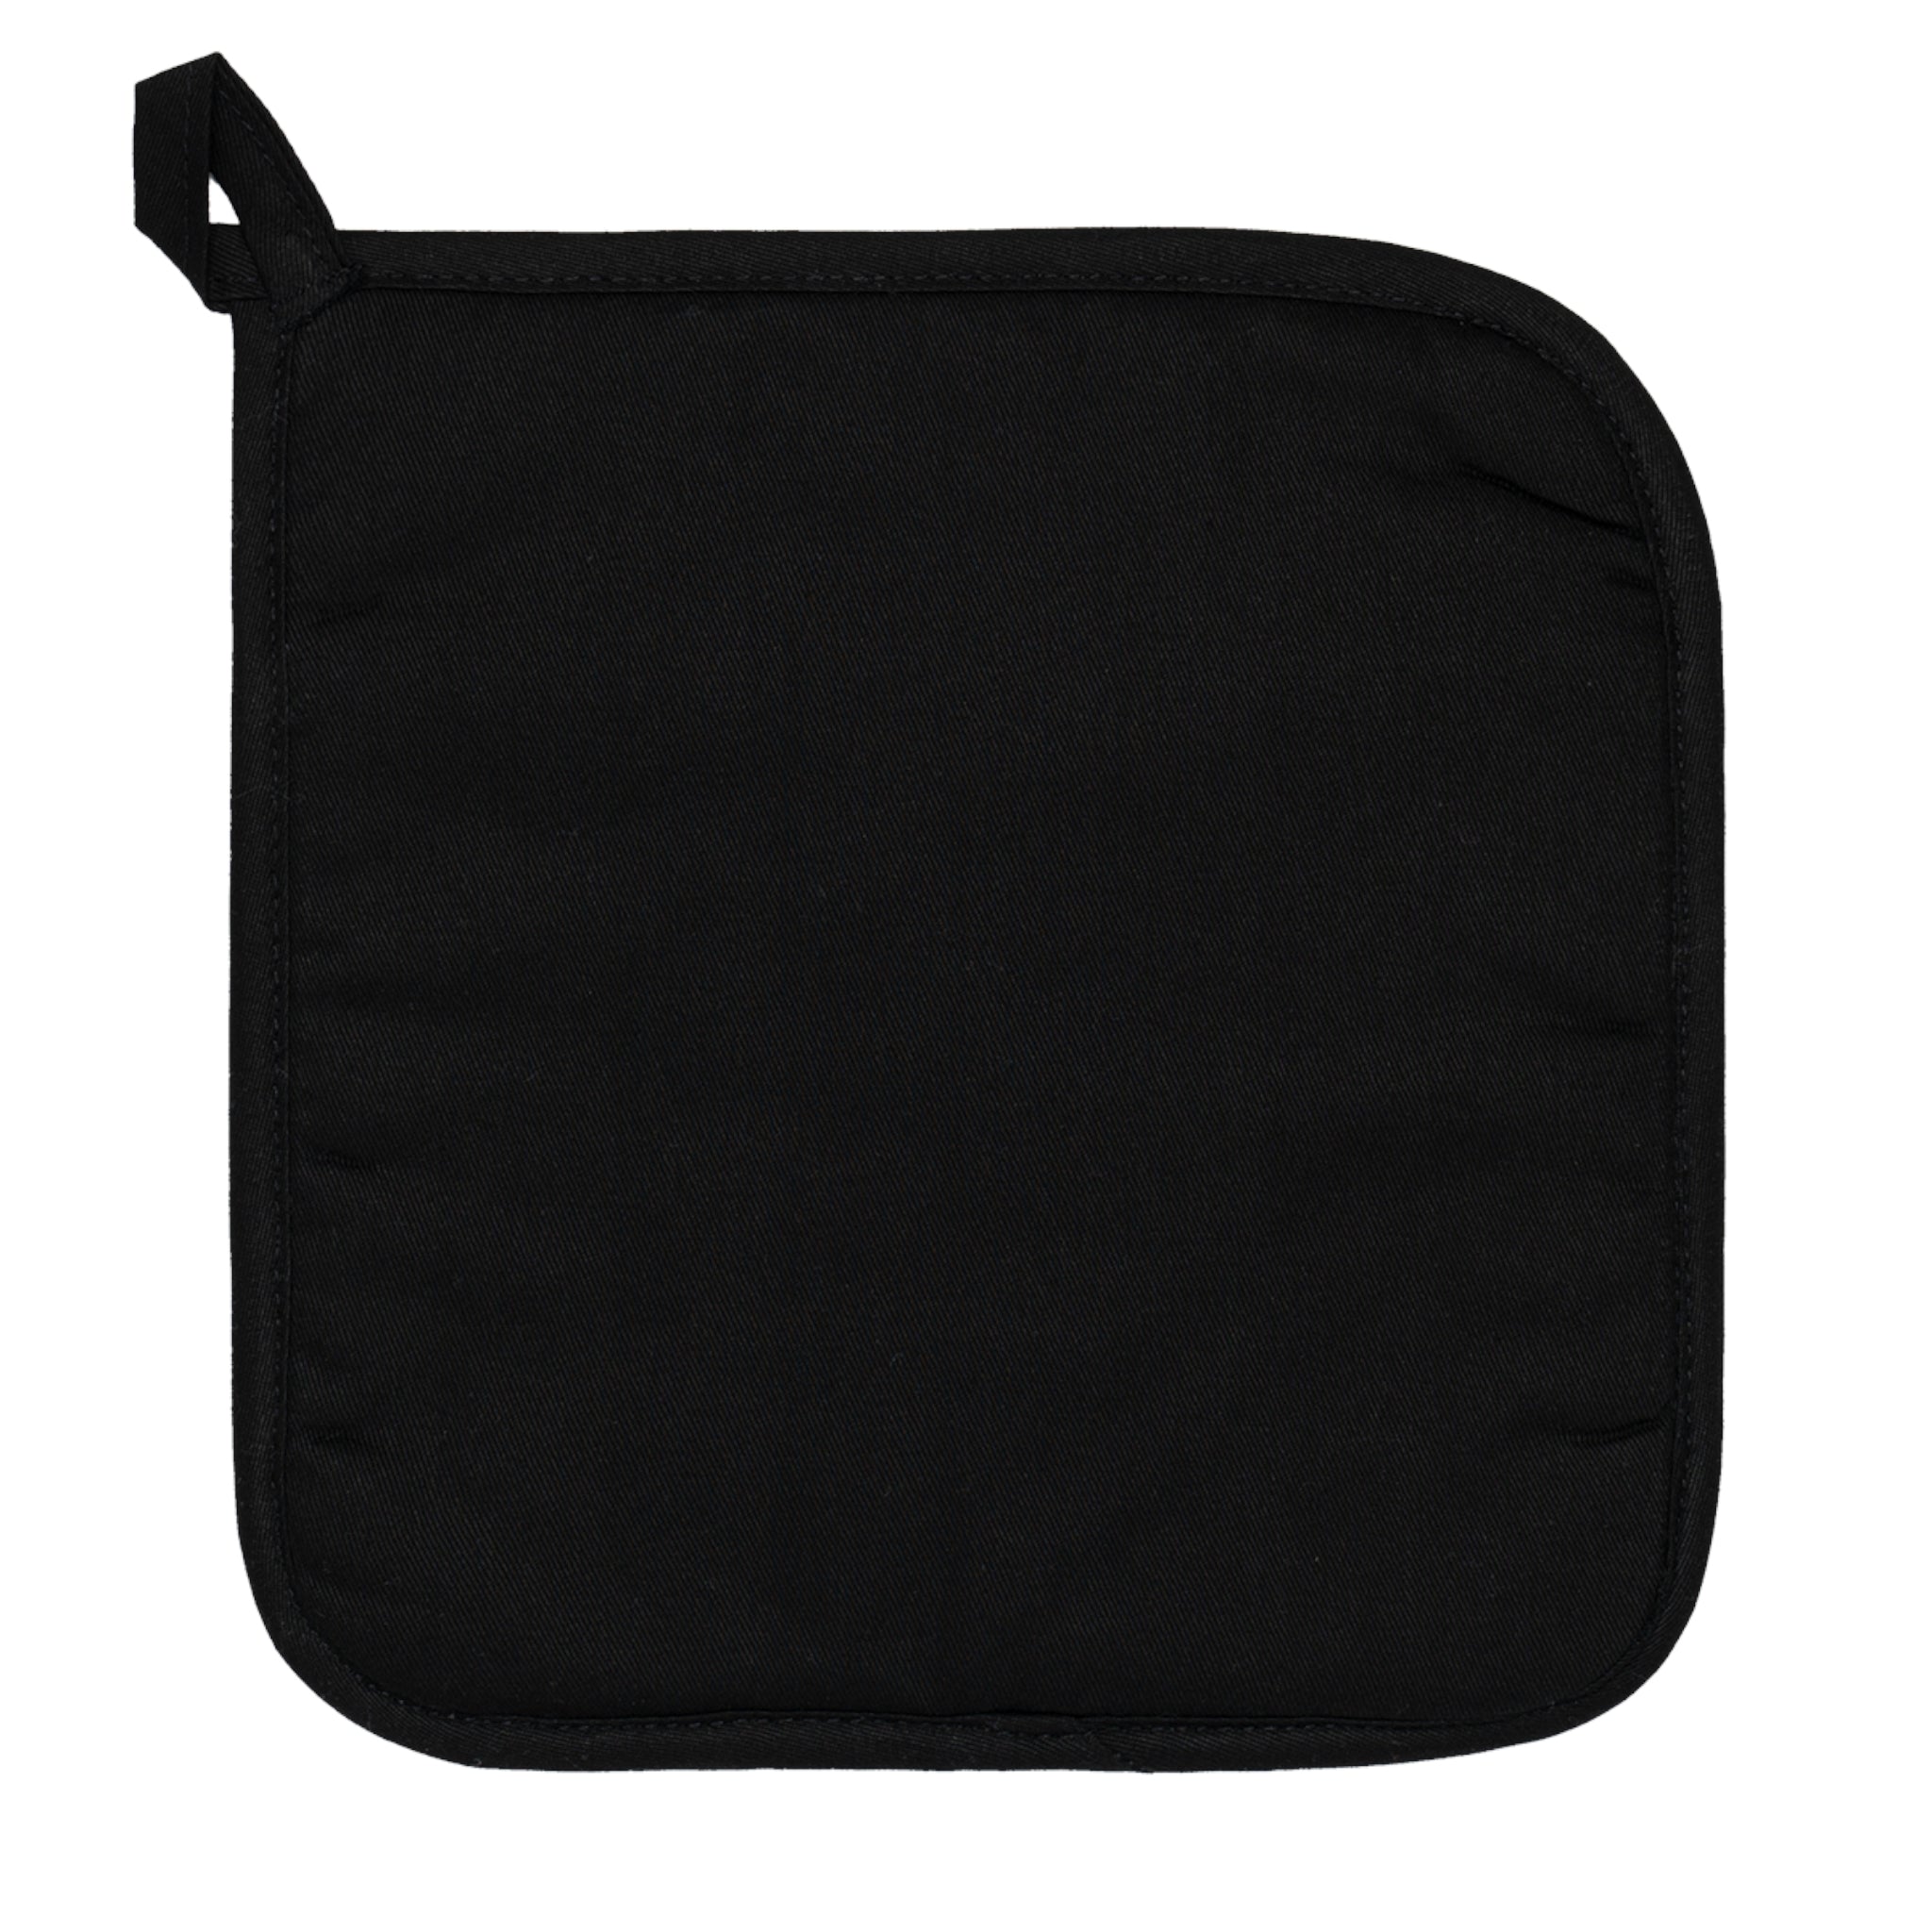 find-the-perfect-responsibility-grid-pot-holder-with-pocket-online_2.jpg